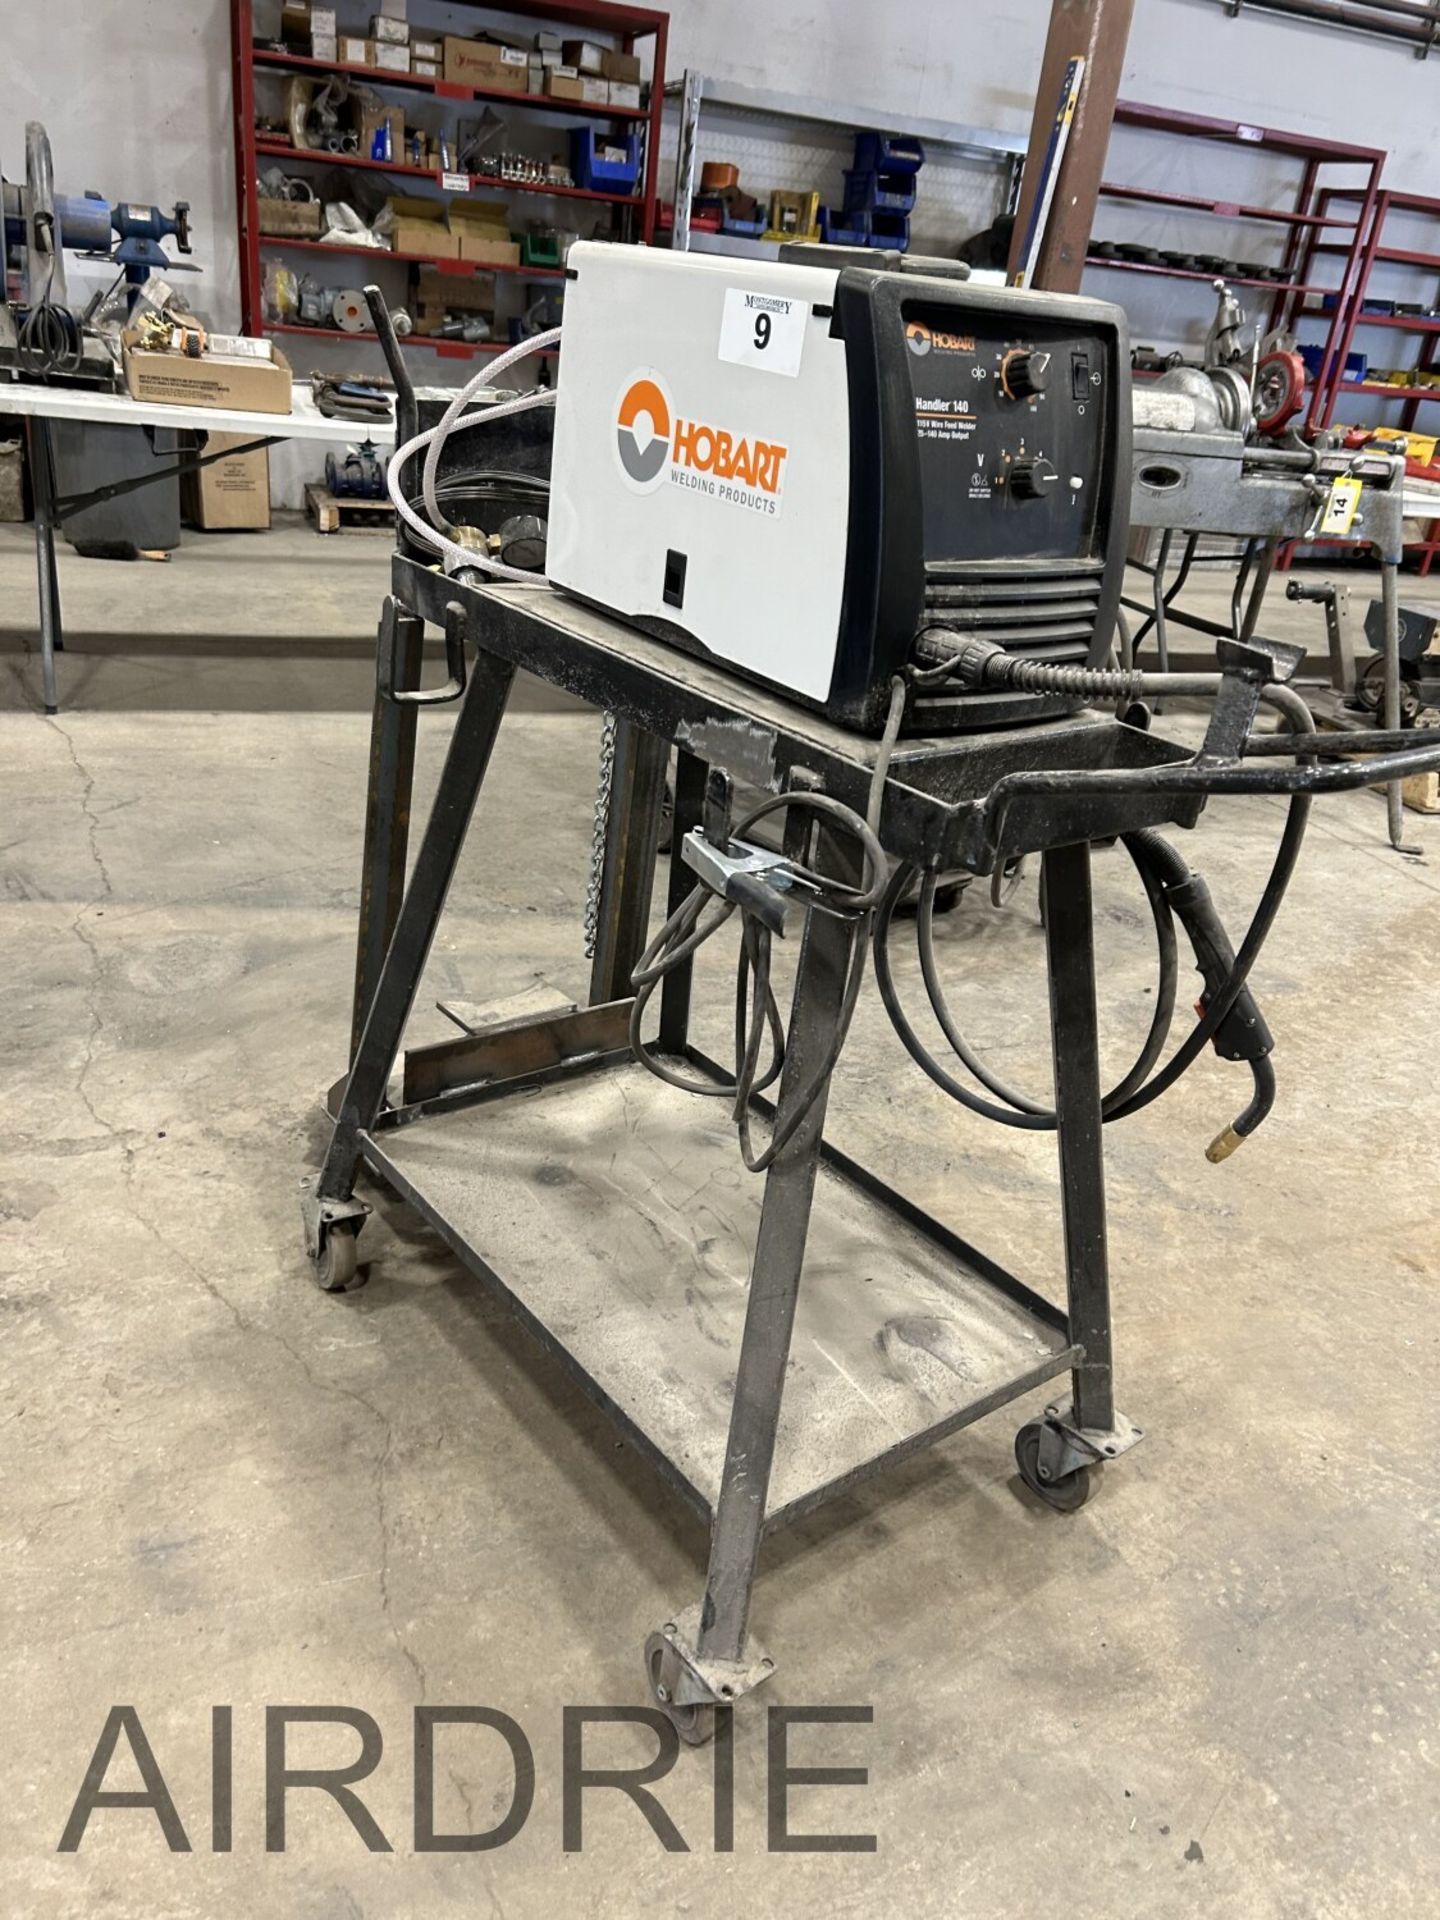 *OFFSITE* HOBART HANDLER 140 115V WIRE FEED WELDER 25-140 AMP OUTFEED ON CART S/N ND020403Y